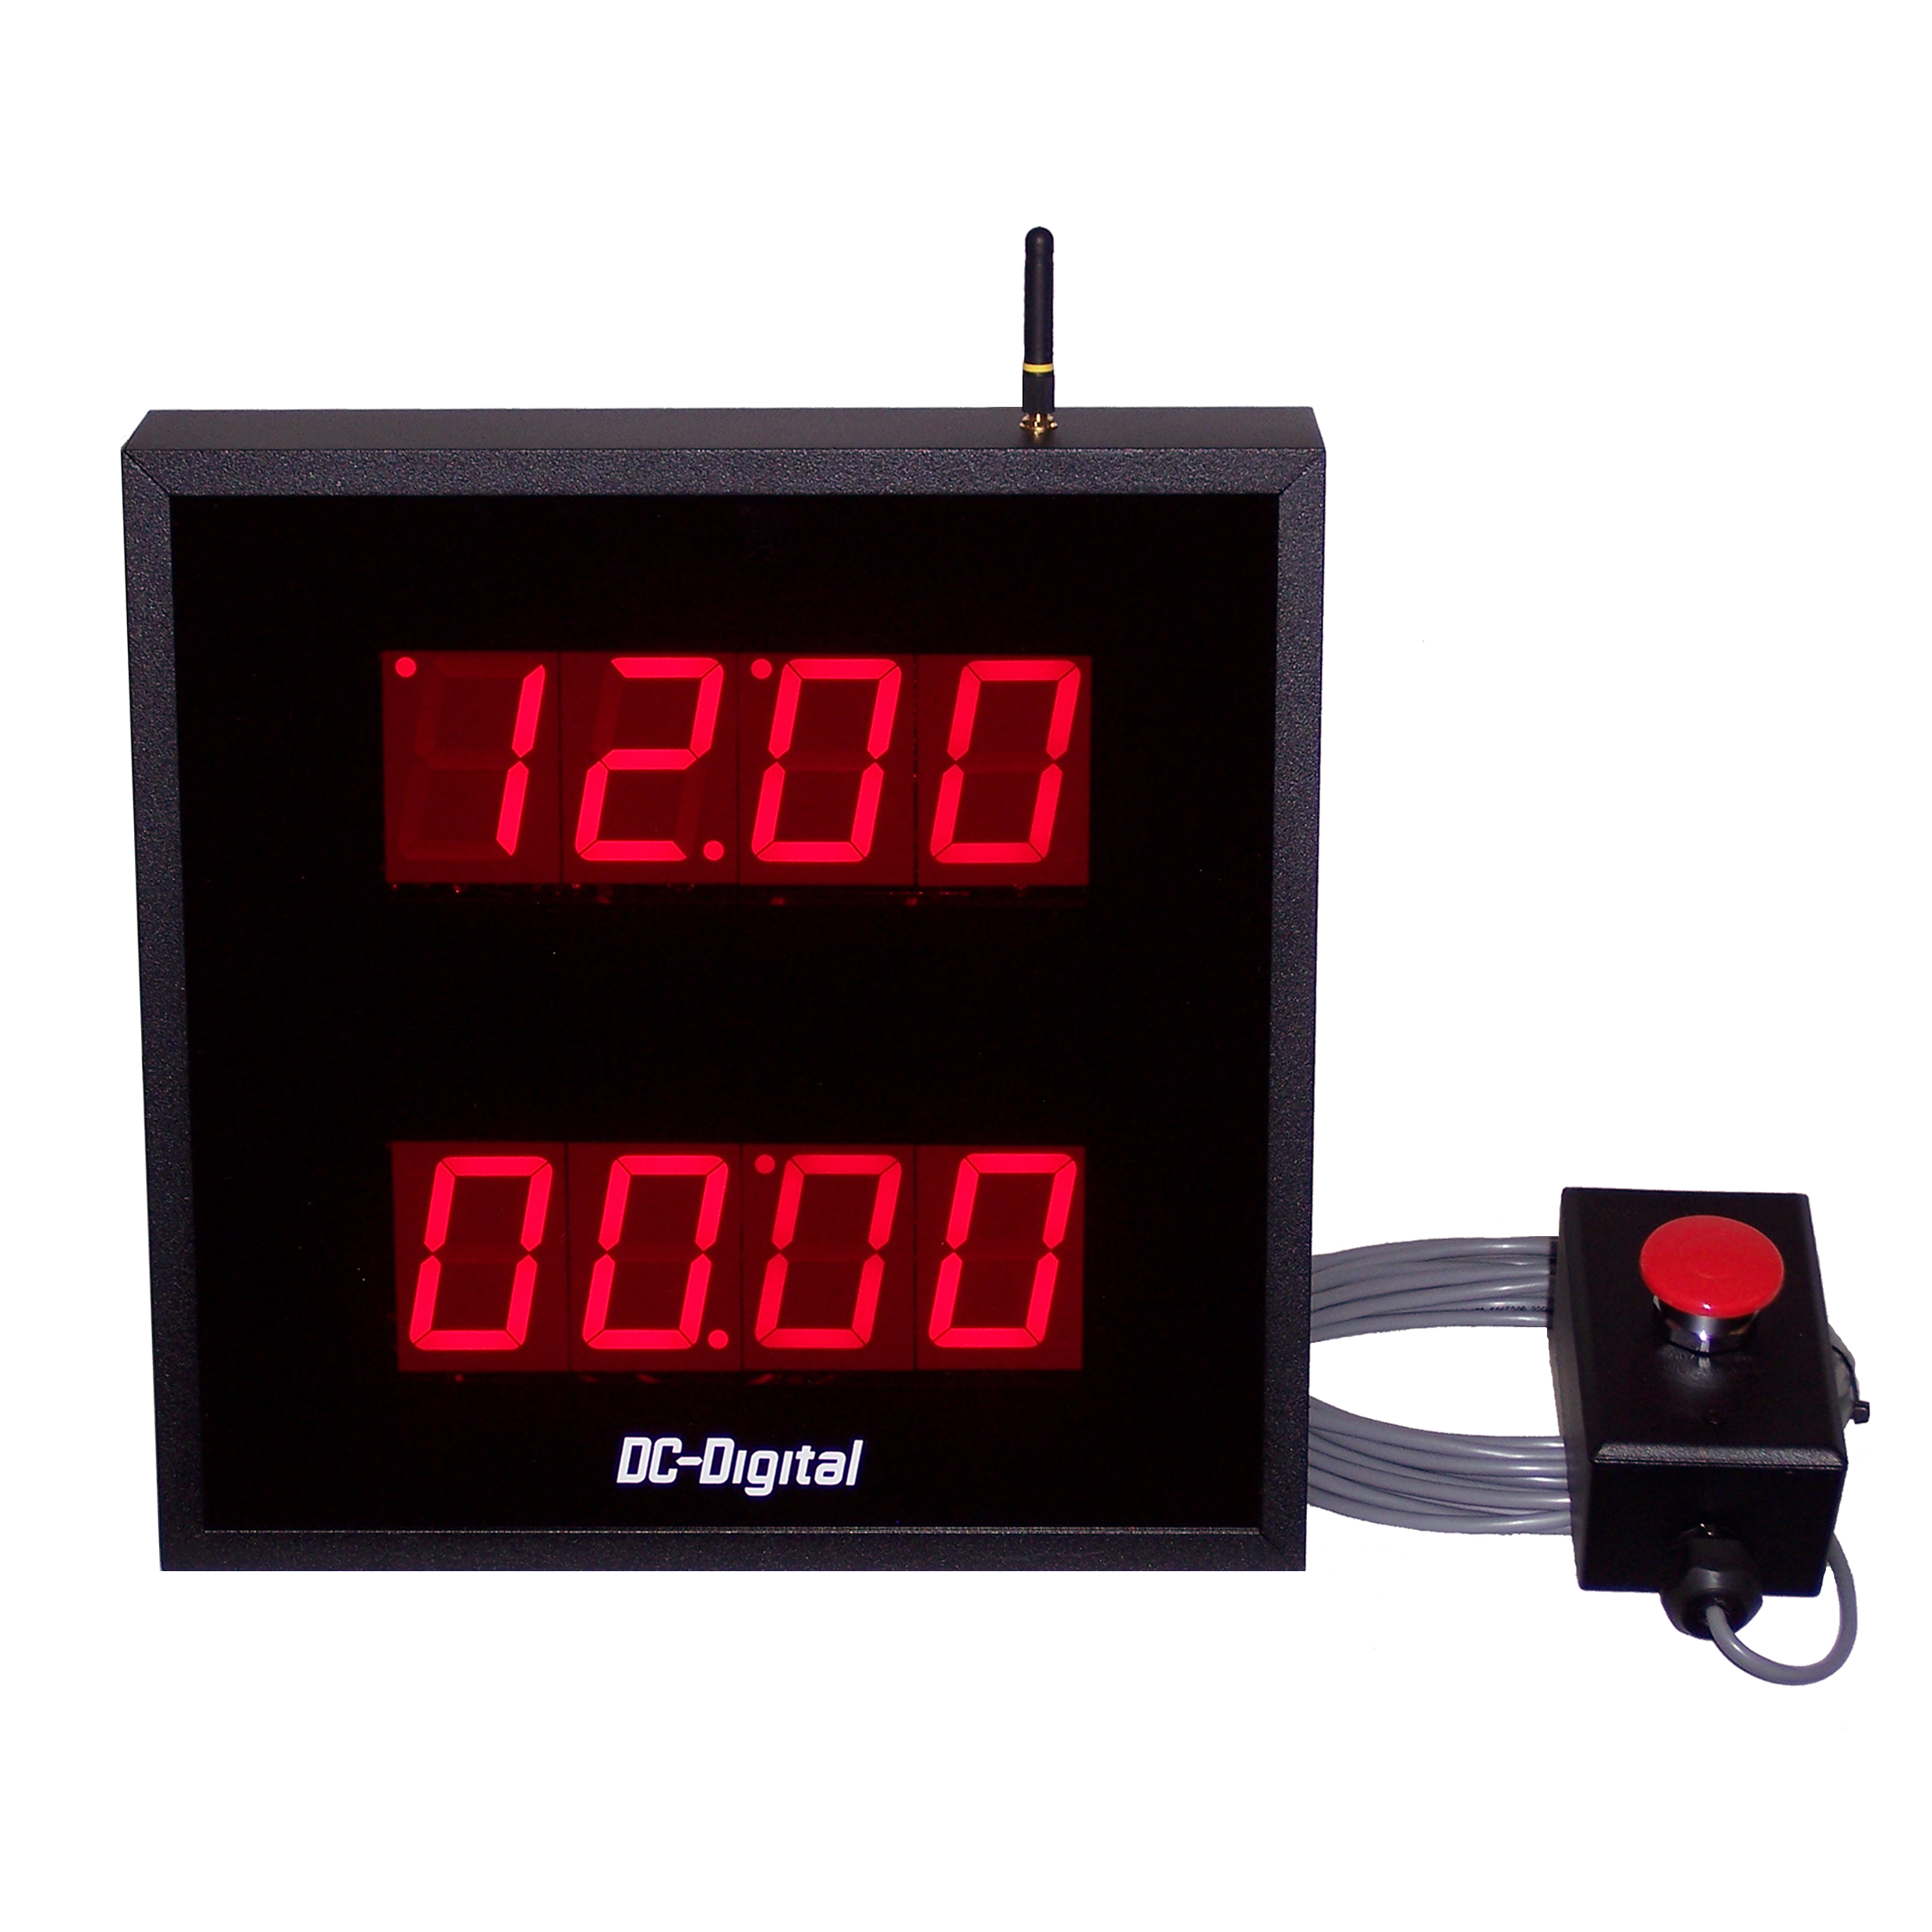 Dual display in one enclosure time of day system clock and count up timer